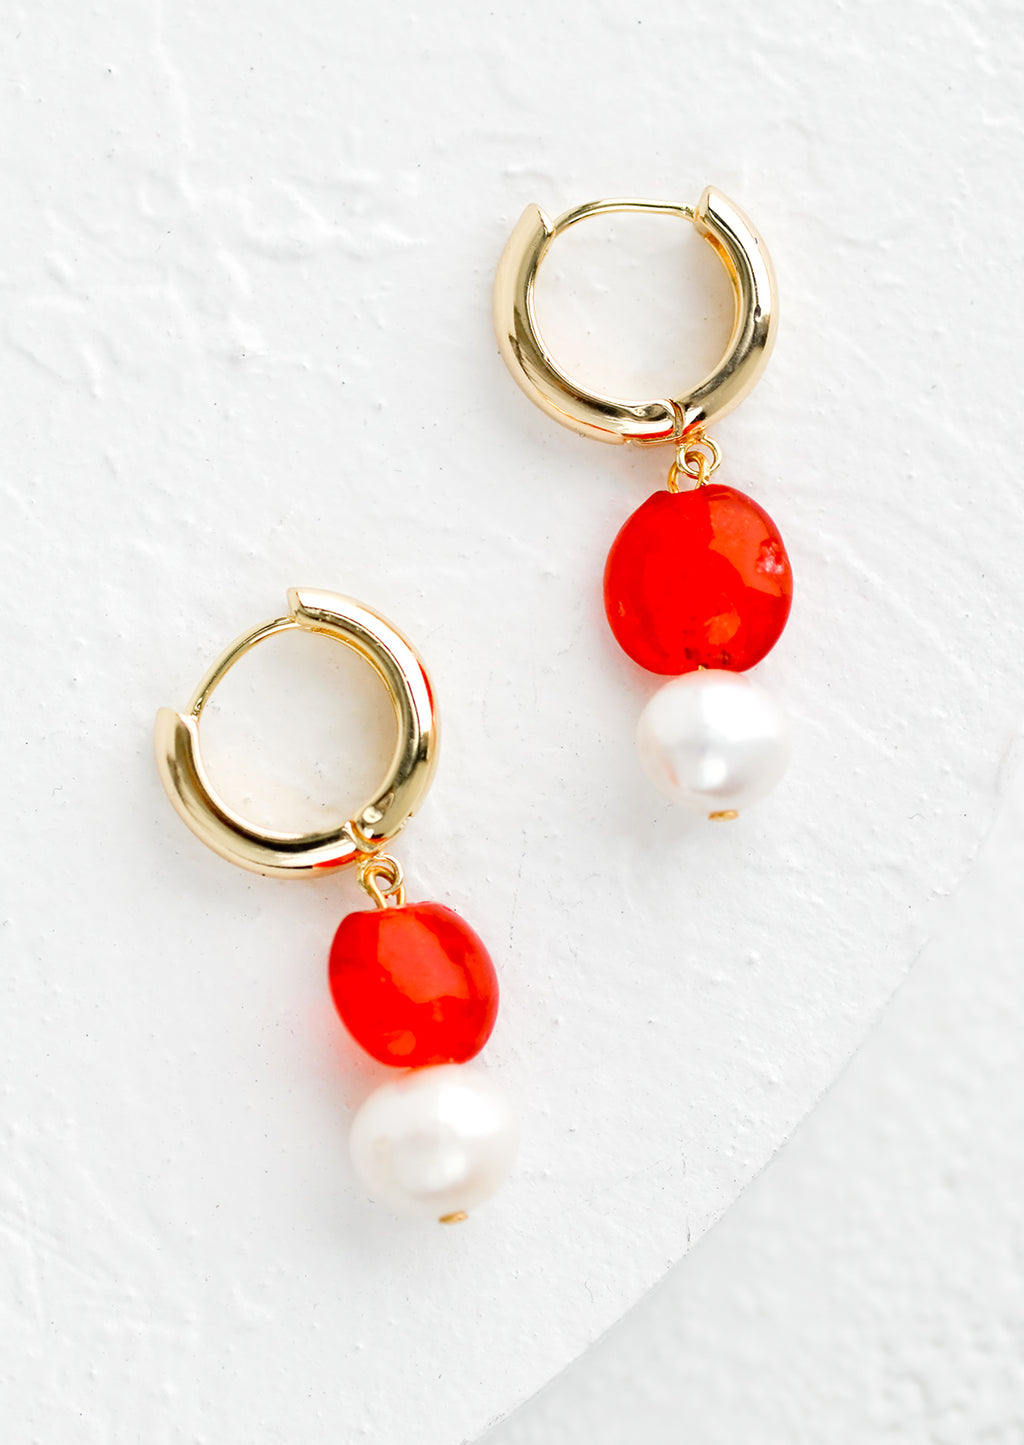 2: A pair of earrings with gold huggie top and red glass and pearl bead.